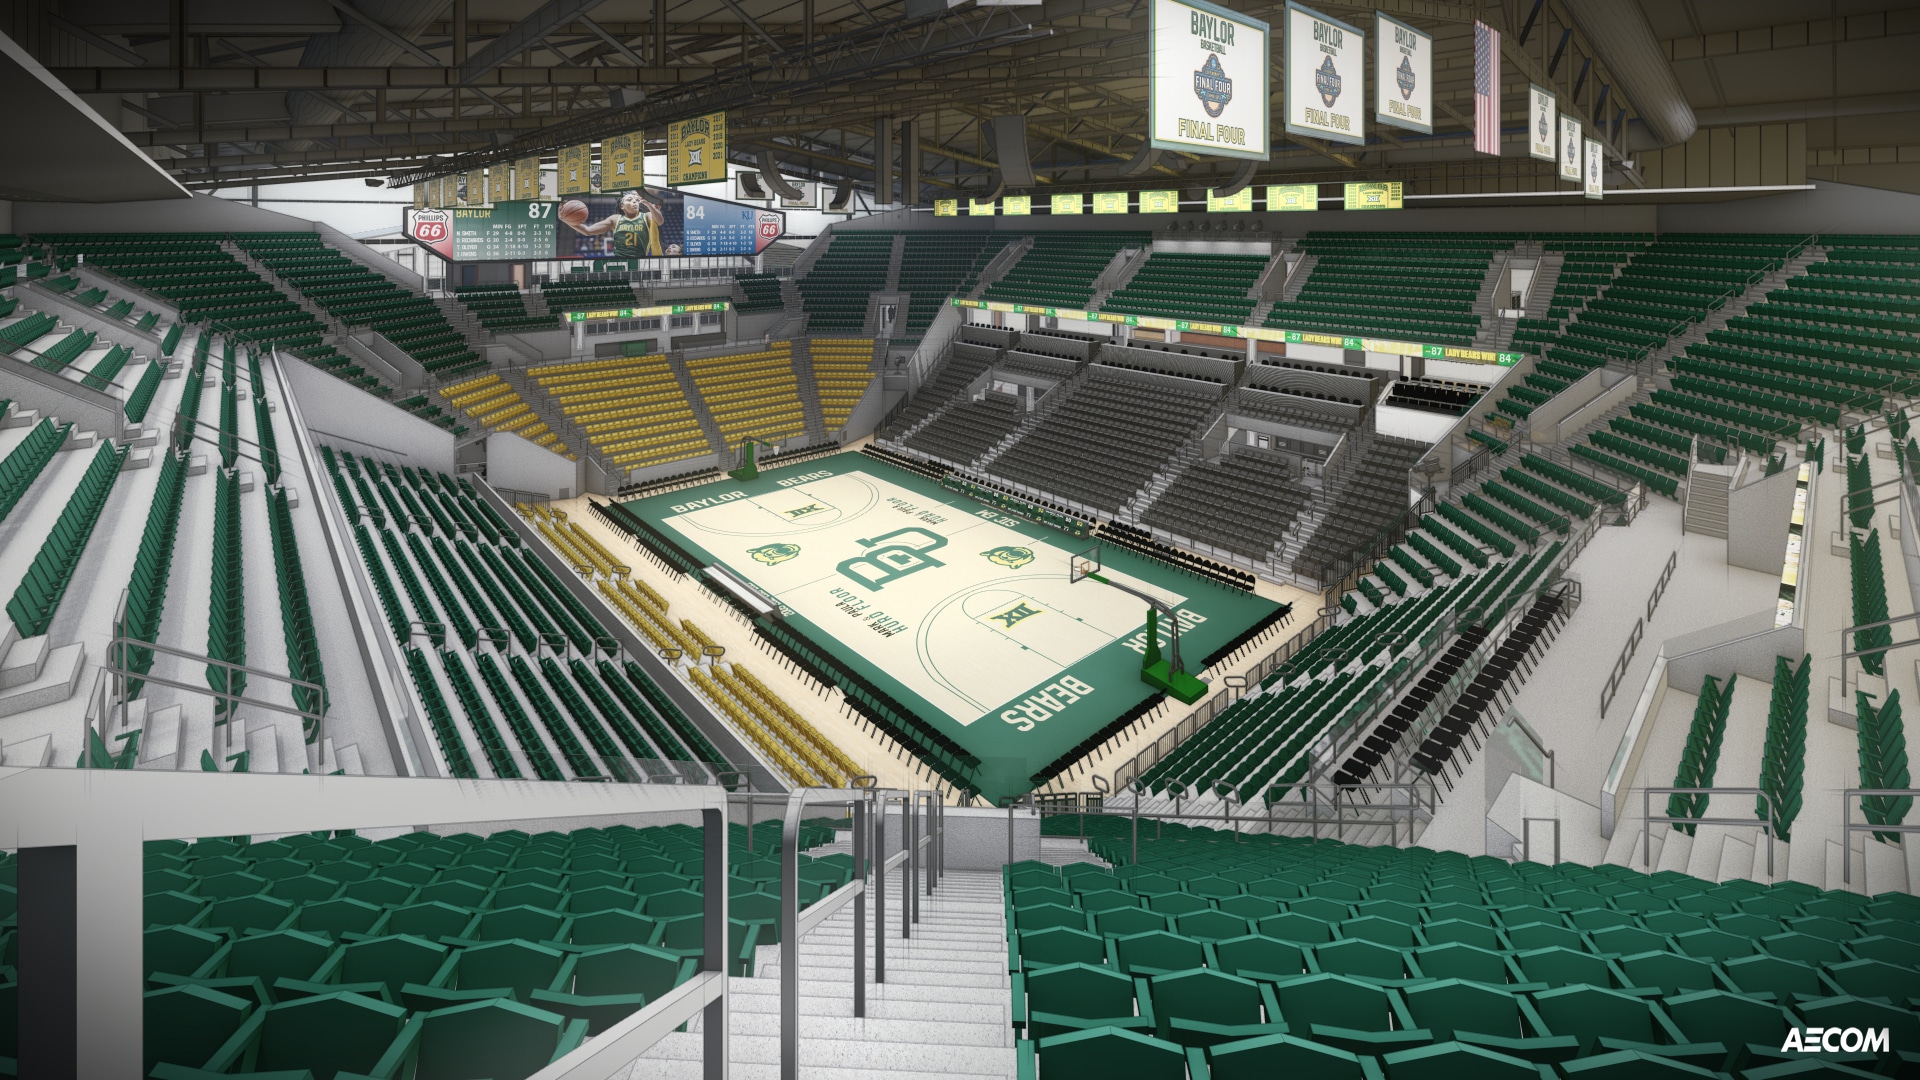 Baylor's new arena "contemporary fieldhouse" VenuesNow